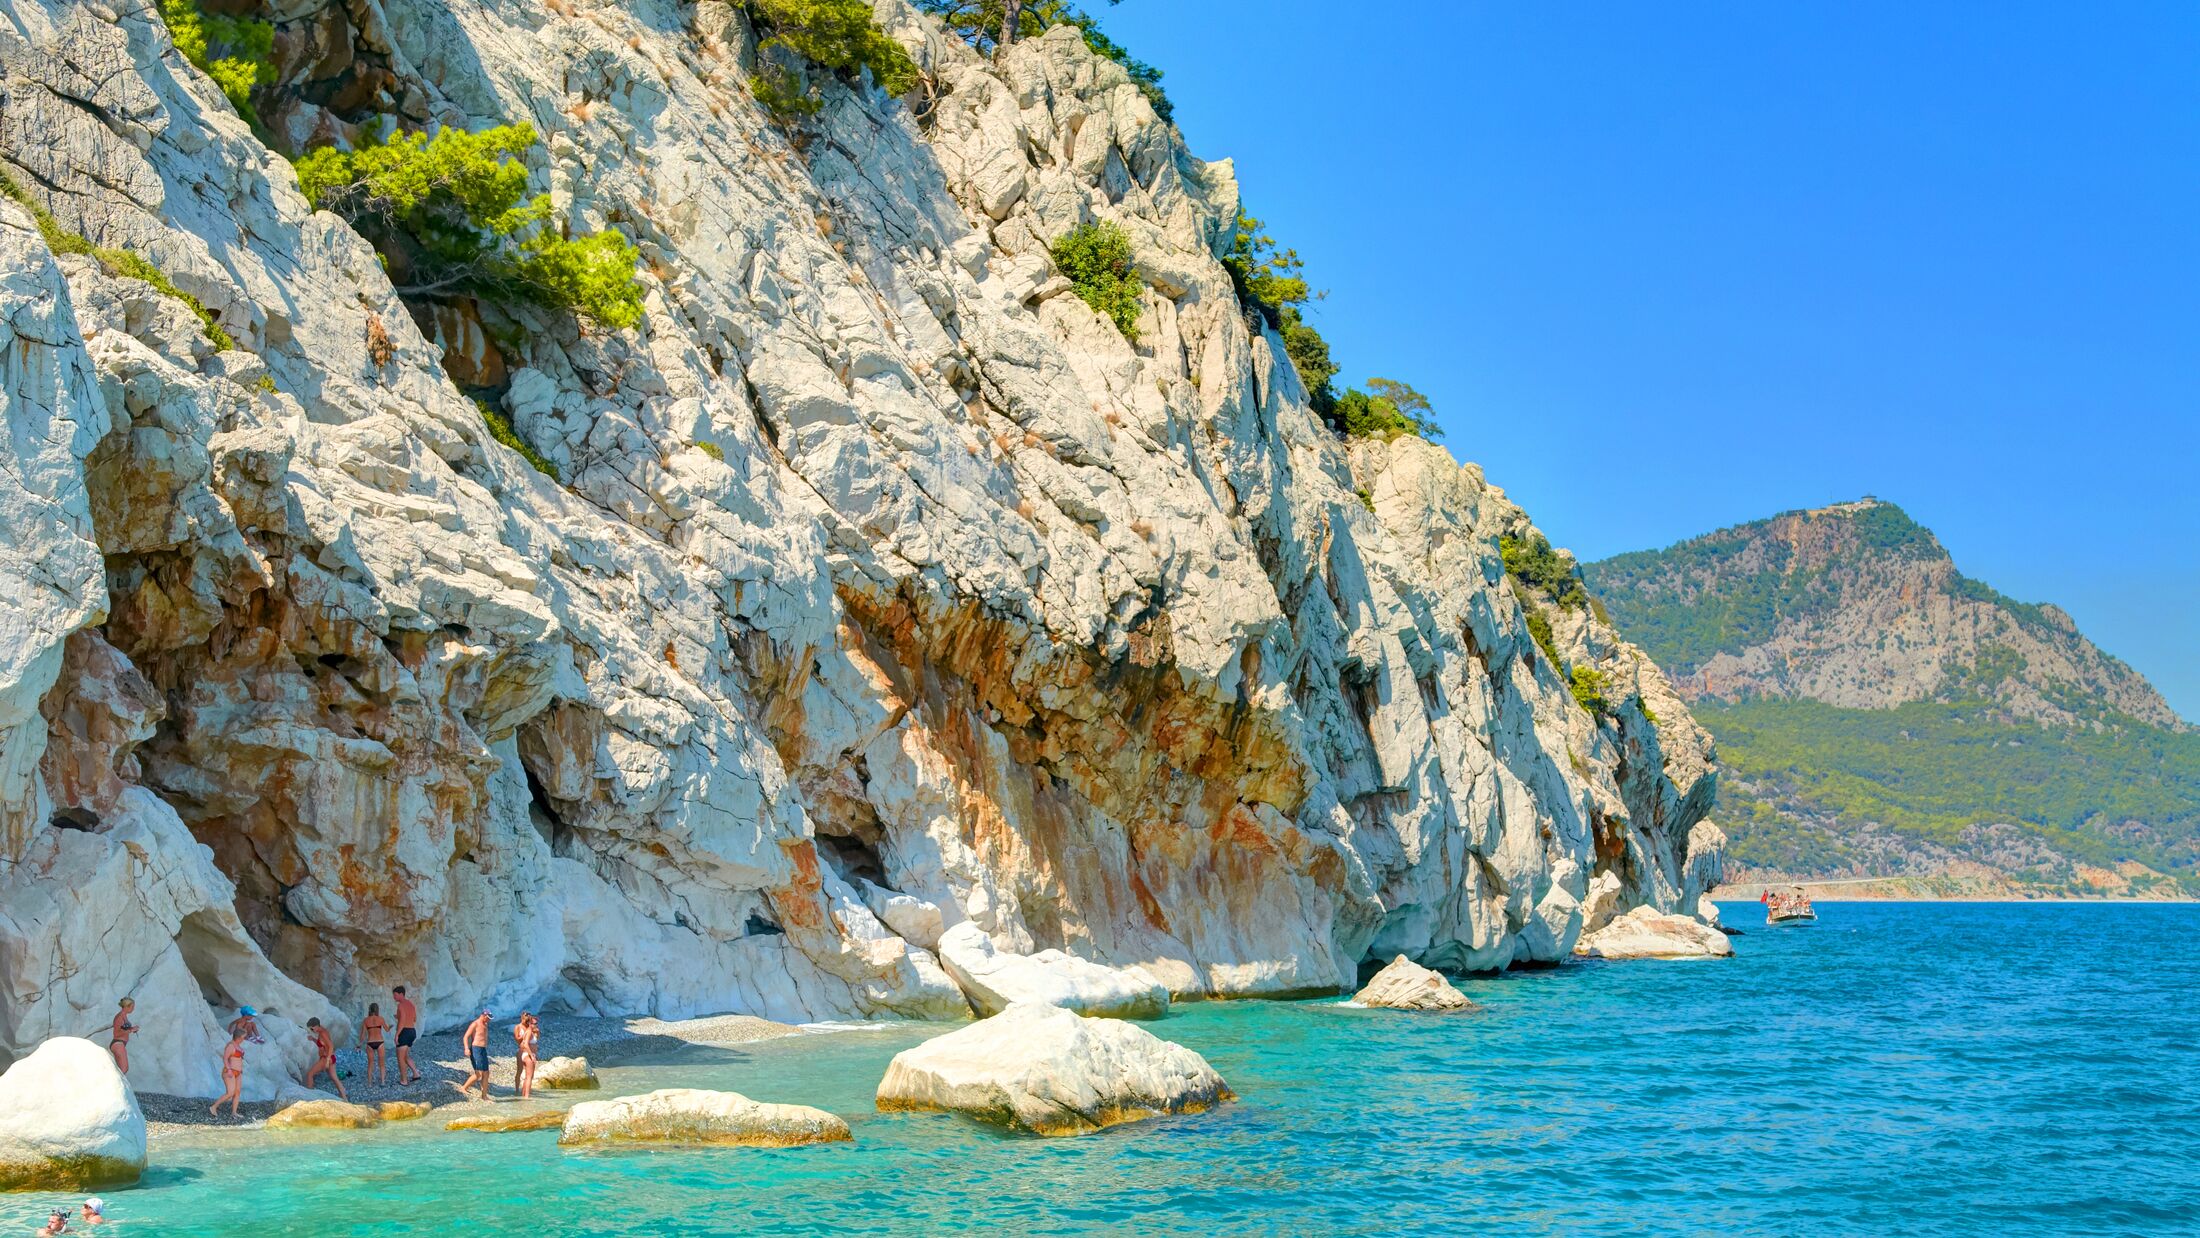 Sand color stone rocks beach with green trees in the Mediterranean Sea Turkey seaside. Swimming people tourists. Best Turkey holidays vacations famous boat tours on Mediterranean Sea. Romantic beach